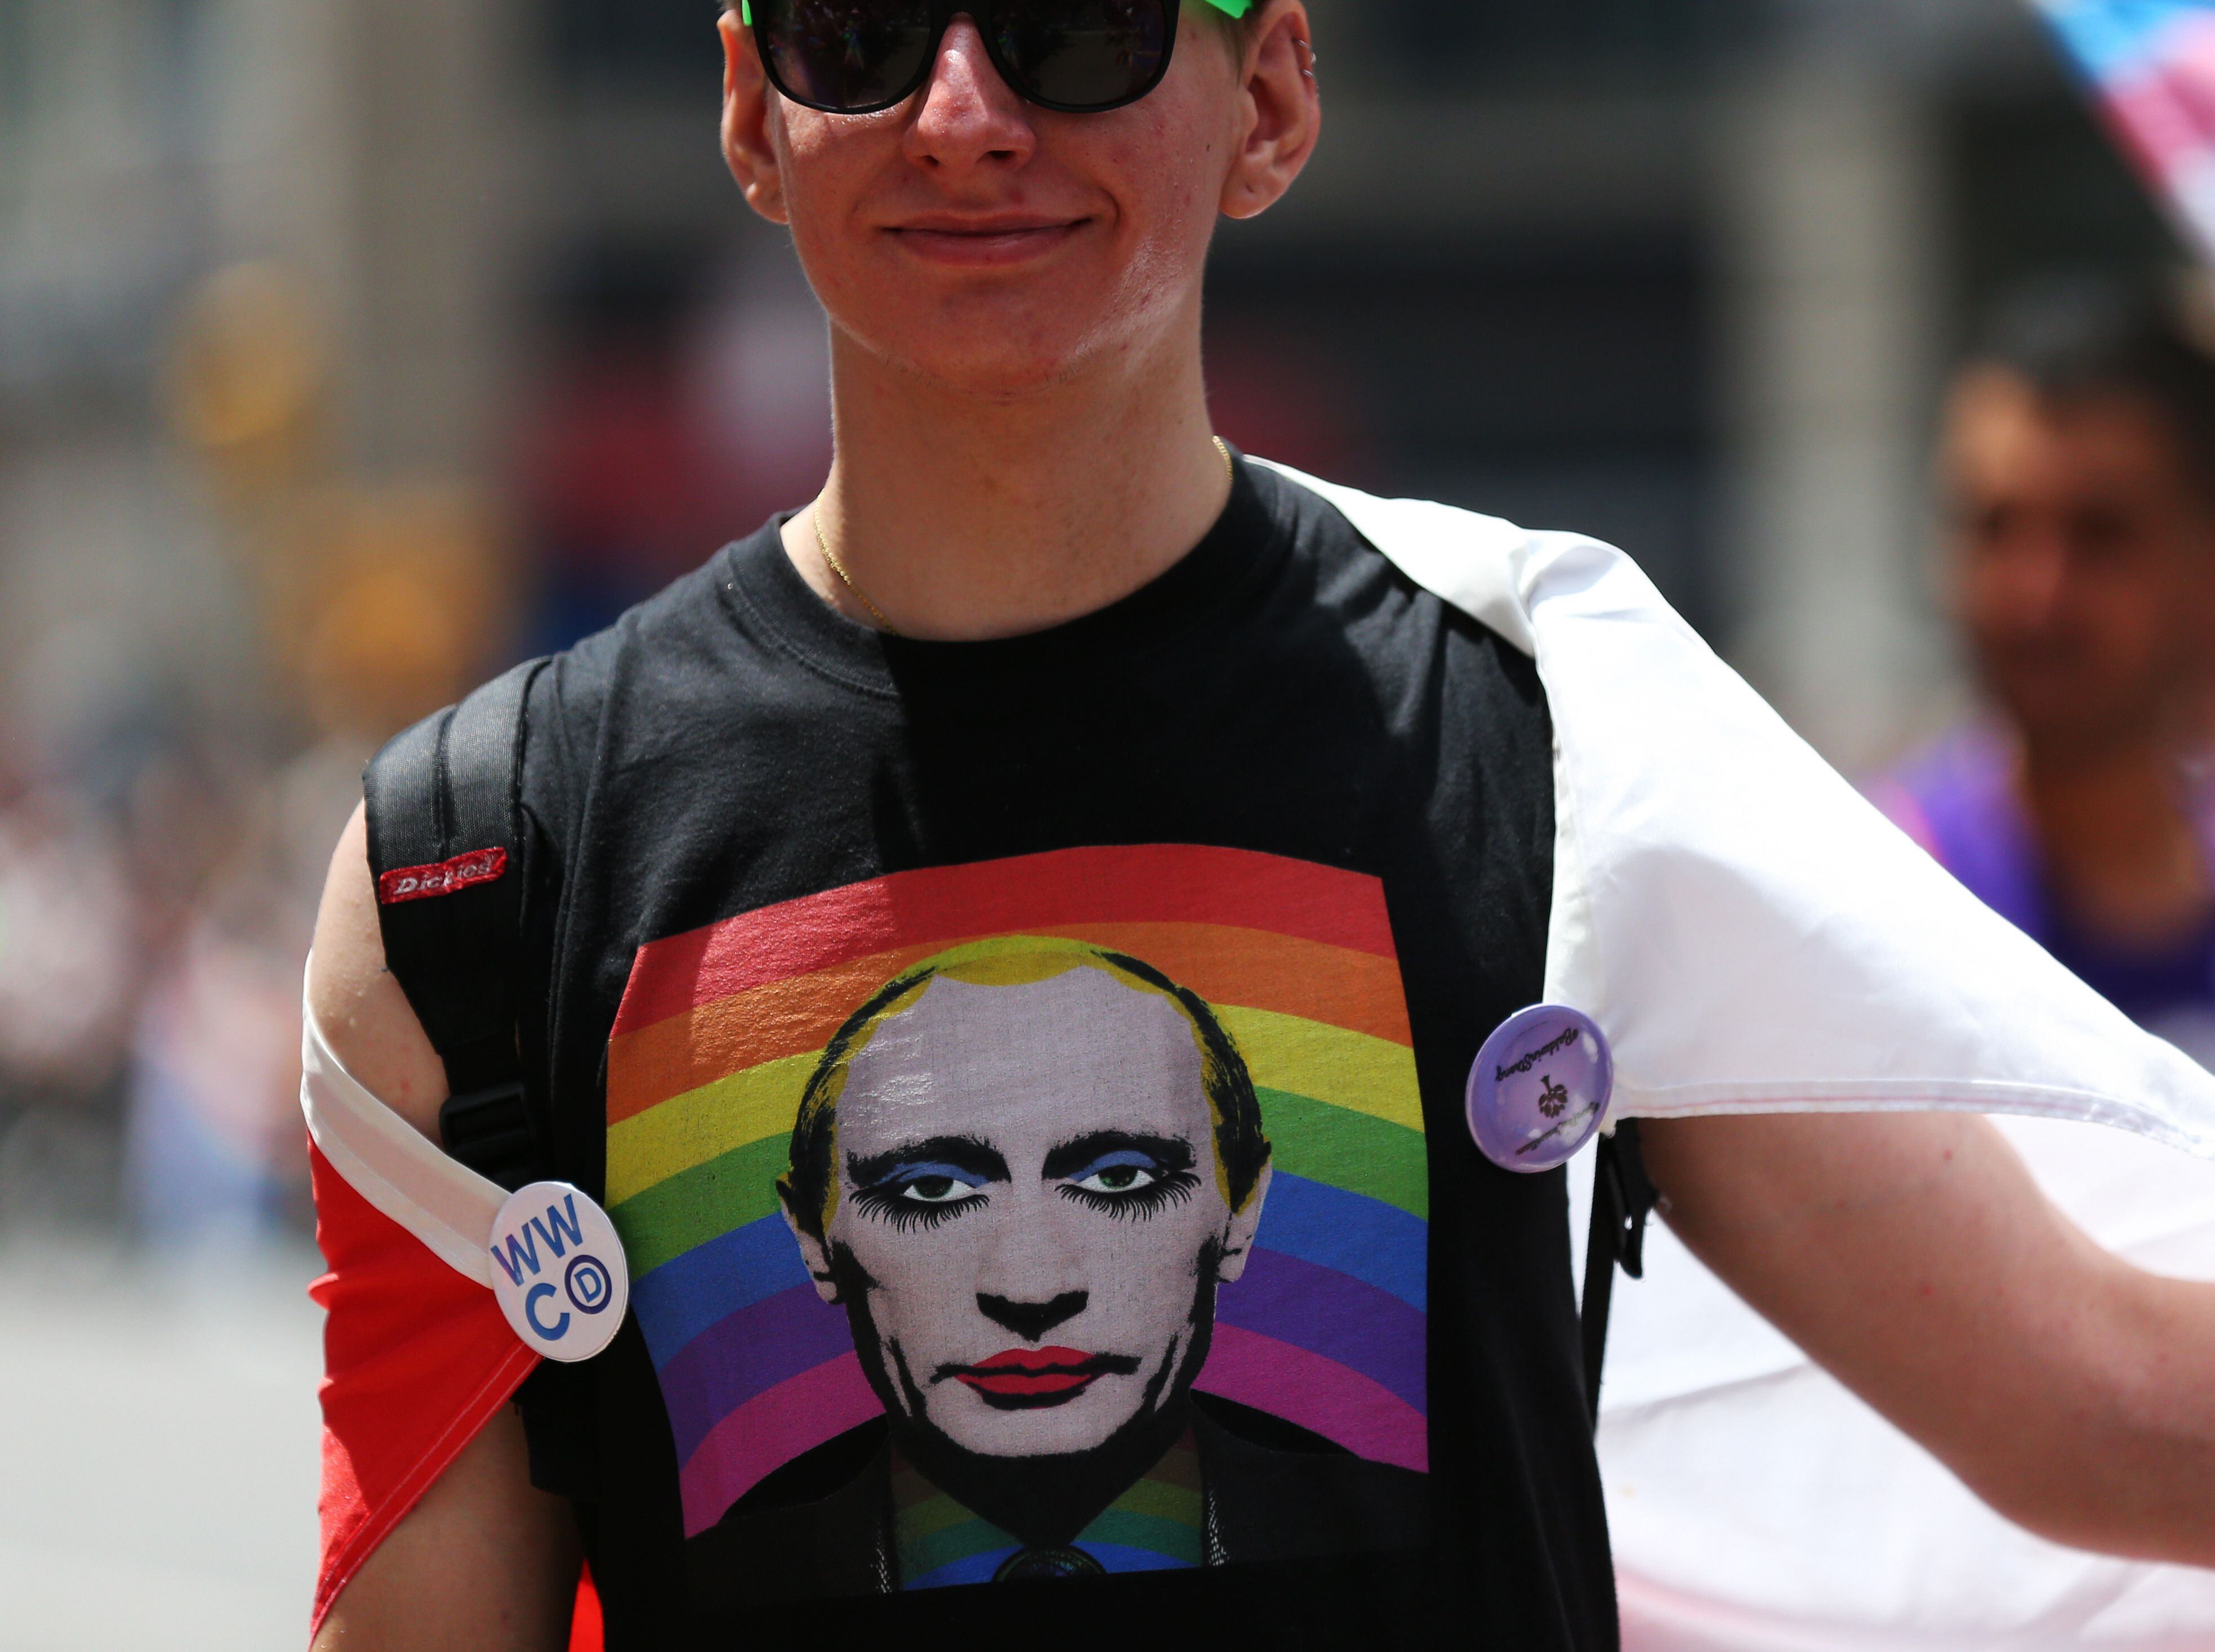 23/06/2018 June 23, 2018 - New York City, New York, USA - Parade participant is seen in t-shirt with Russian president Vladimir Putin during the Pride March on June 24, 2018 in New York. The first March was held in 1970.POLITICA Europa Press/Contacto/Anna Sergeeva